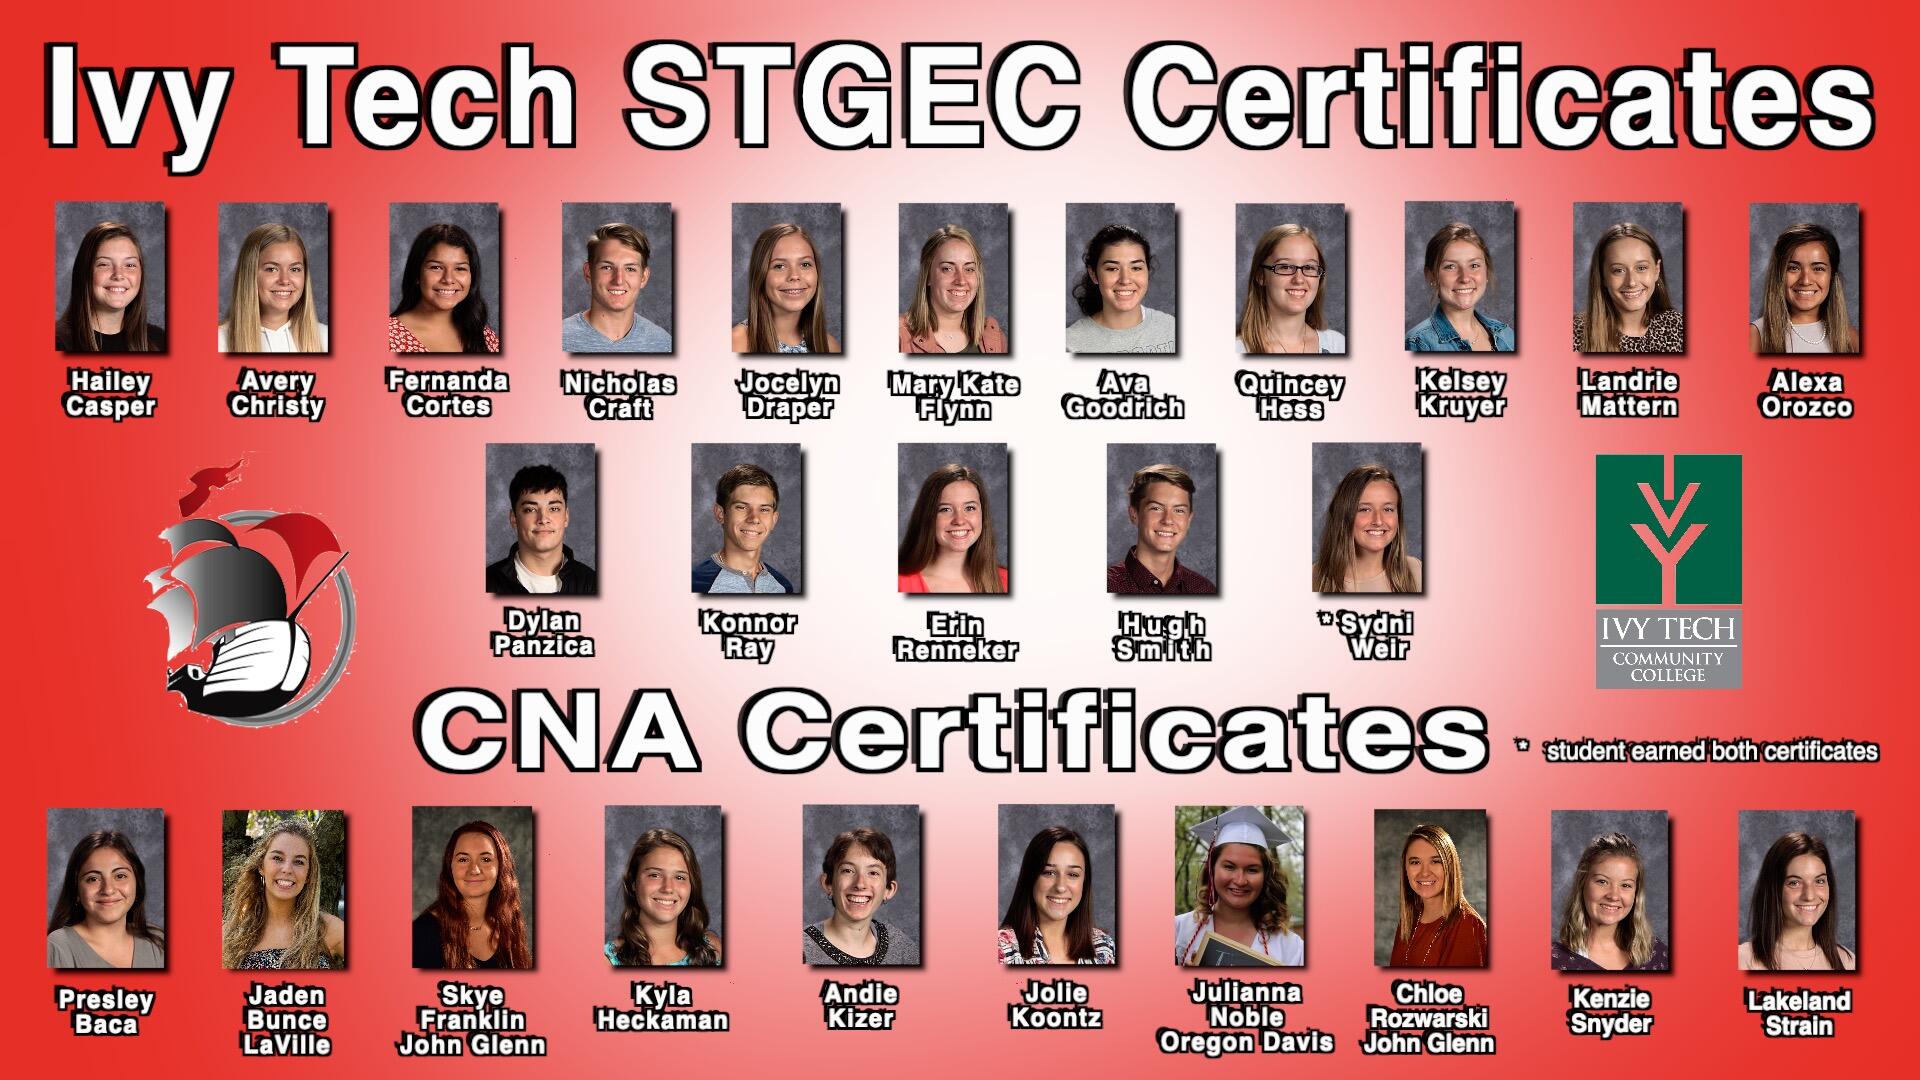 Ivy Tech STGEC certificates with photos of students receiving certificates-CNA certificates and photos of students receiving certificates- PHS ship logo and Ivy Tech logo